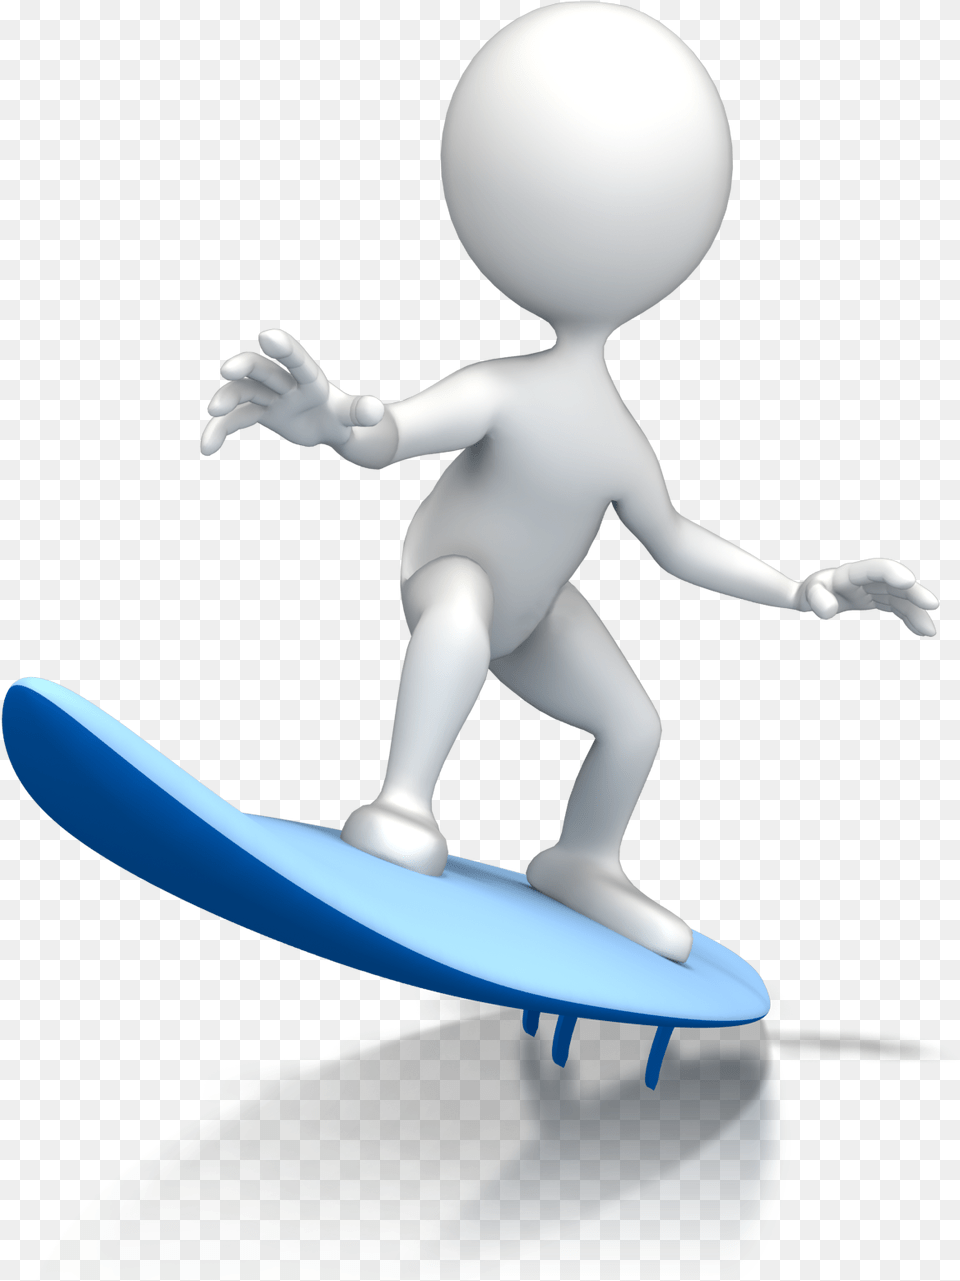 Presentermedia Surfing Presentation Powerpoint Animation Animated Surfer Transparent Background, Water, Sea Waves, Sea, Nature Png